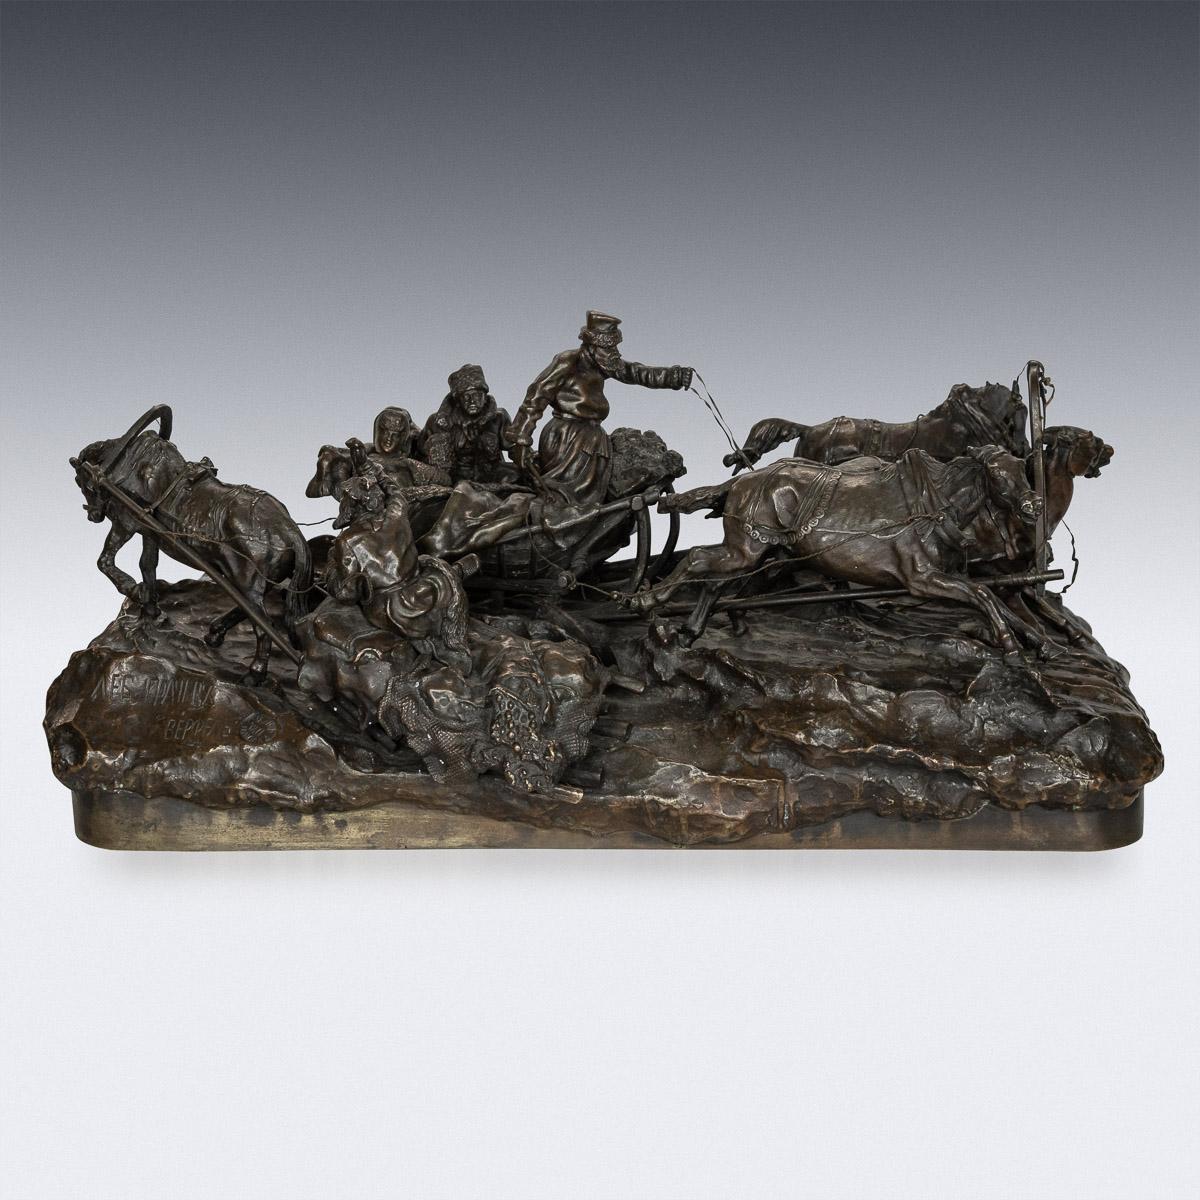 Antique 19th century Russian patinated bronze group of a speeding troika passing a peasant sleigh, on a rectangular naturalistic base, the figures realistically cast as a coachman driving three horses (Troika), with two passengers at the back,